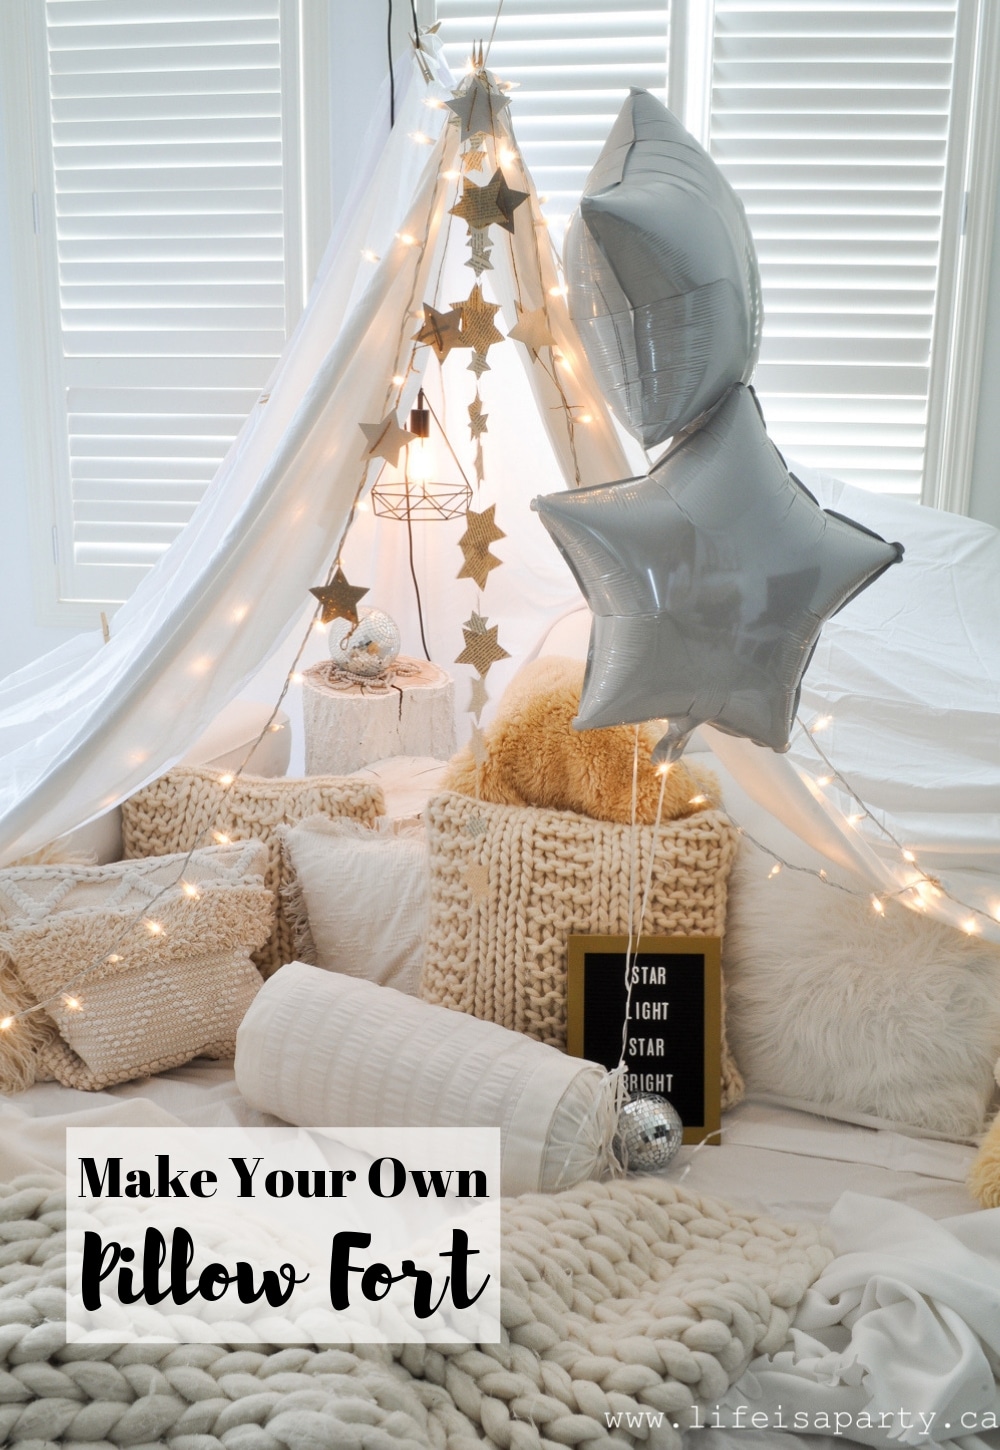 How To Build A Pillow Fort -make a magical pillow fort with fairy lights and starry decorations, and star themed snacks for family night or date night.